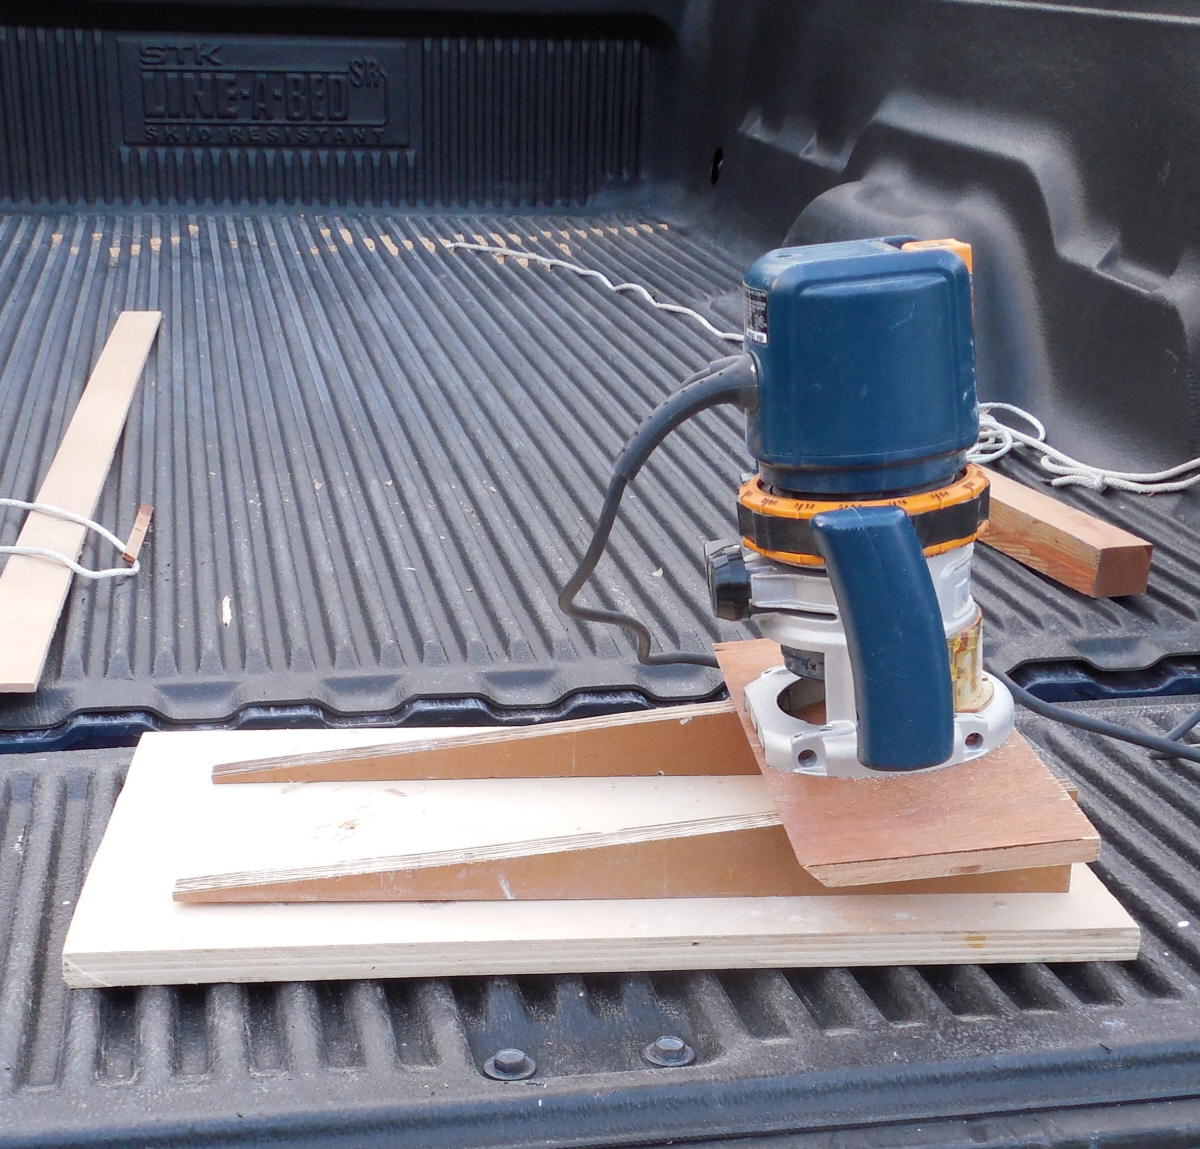 Plywood wedge scarf jig with wedges attached to a base plate. My 